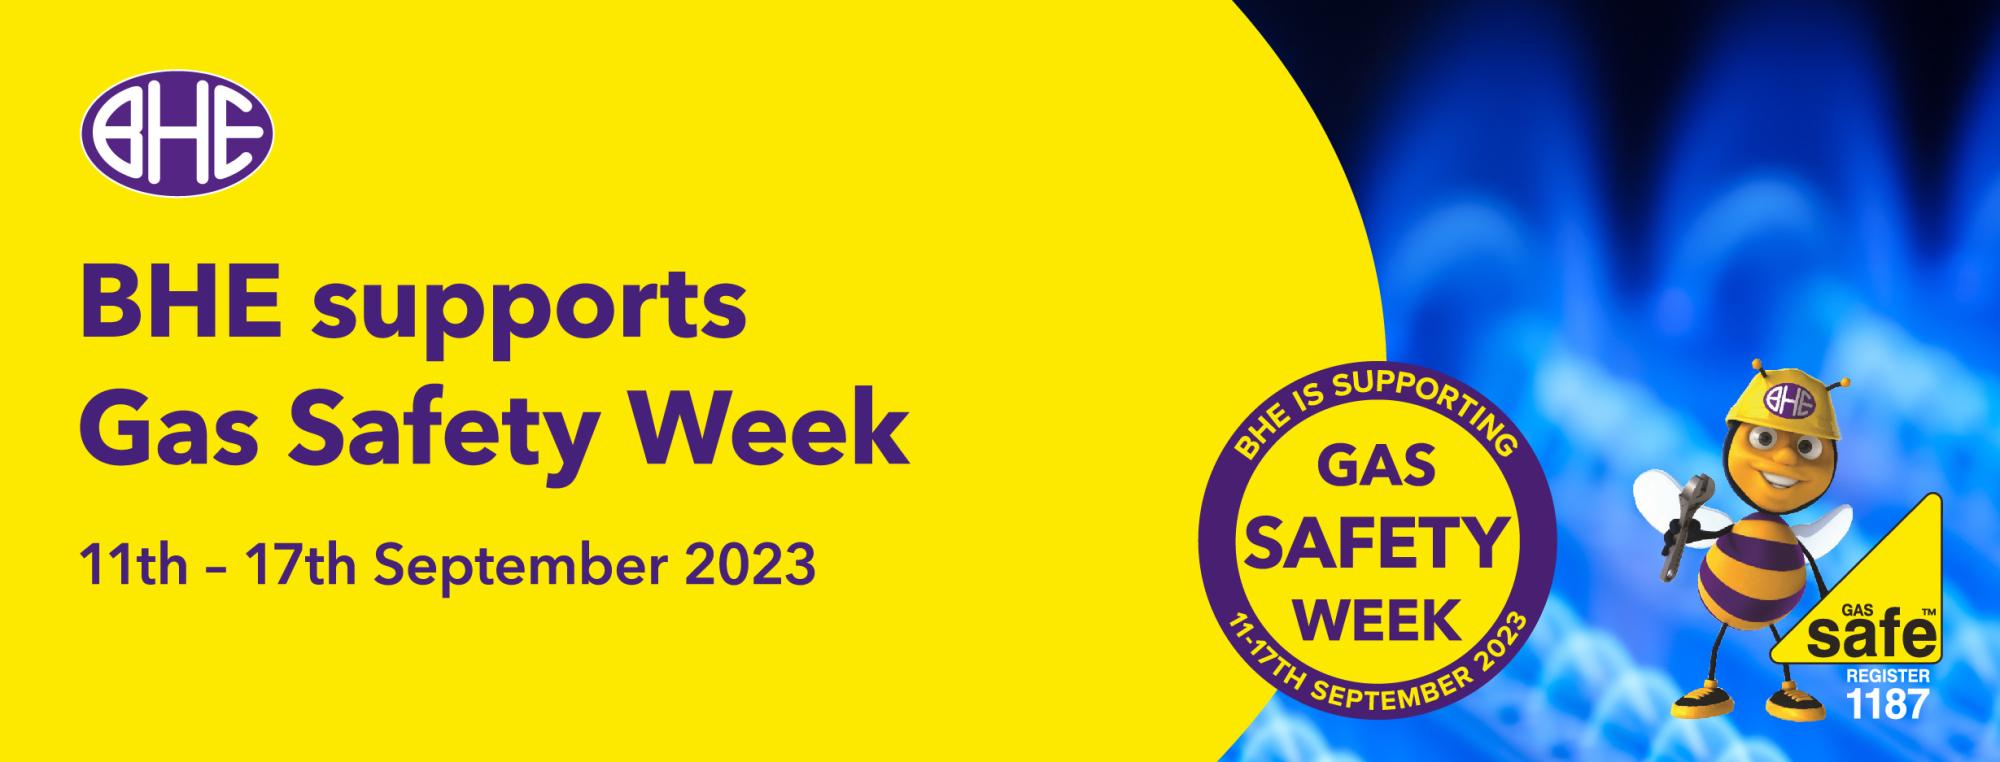 BHE supports Gas Safety Week 2023, running from 11-17th September 2023